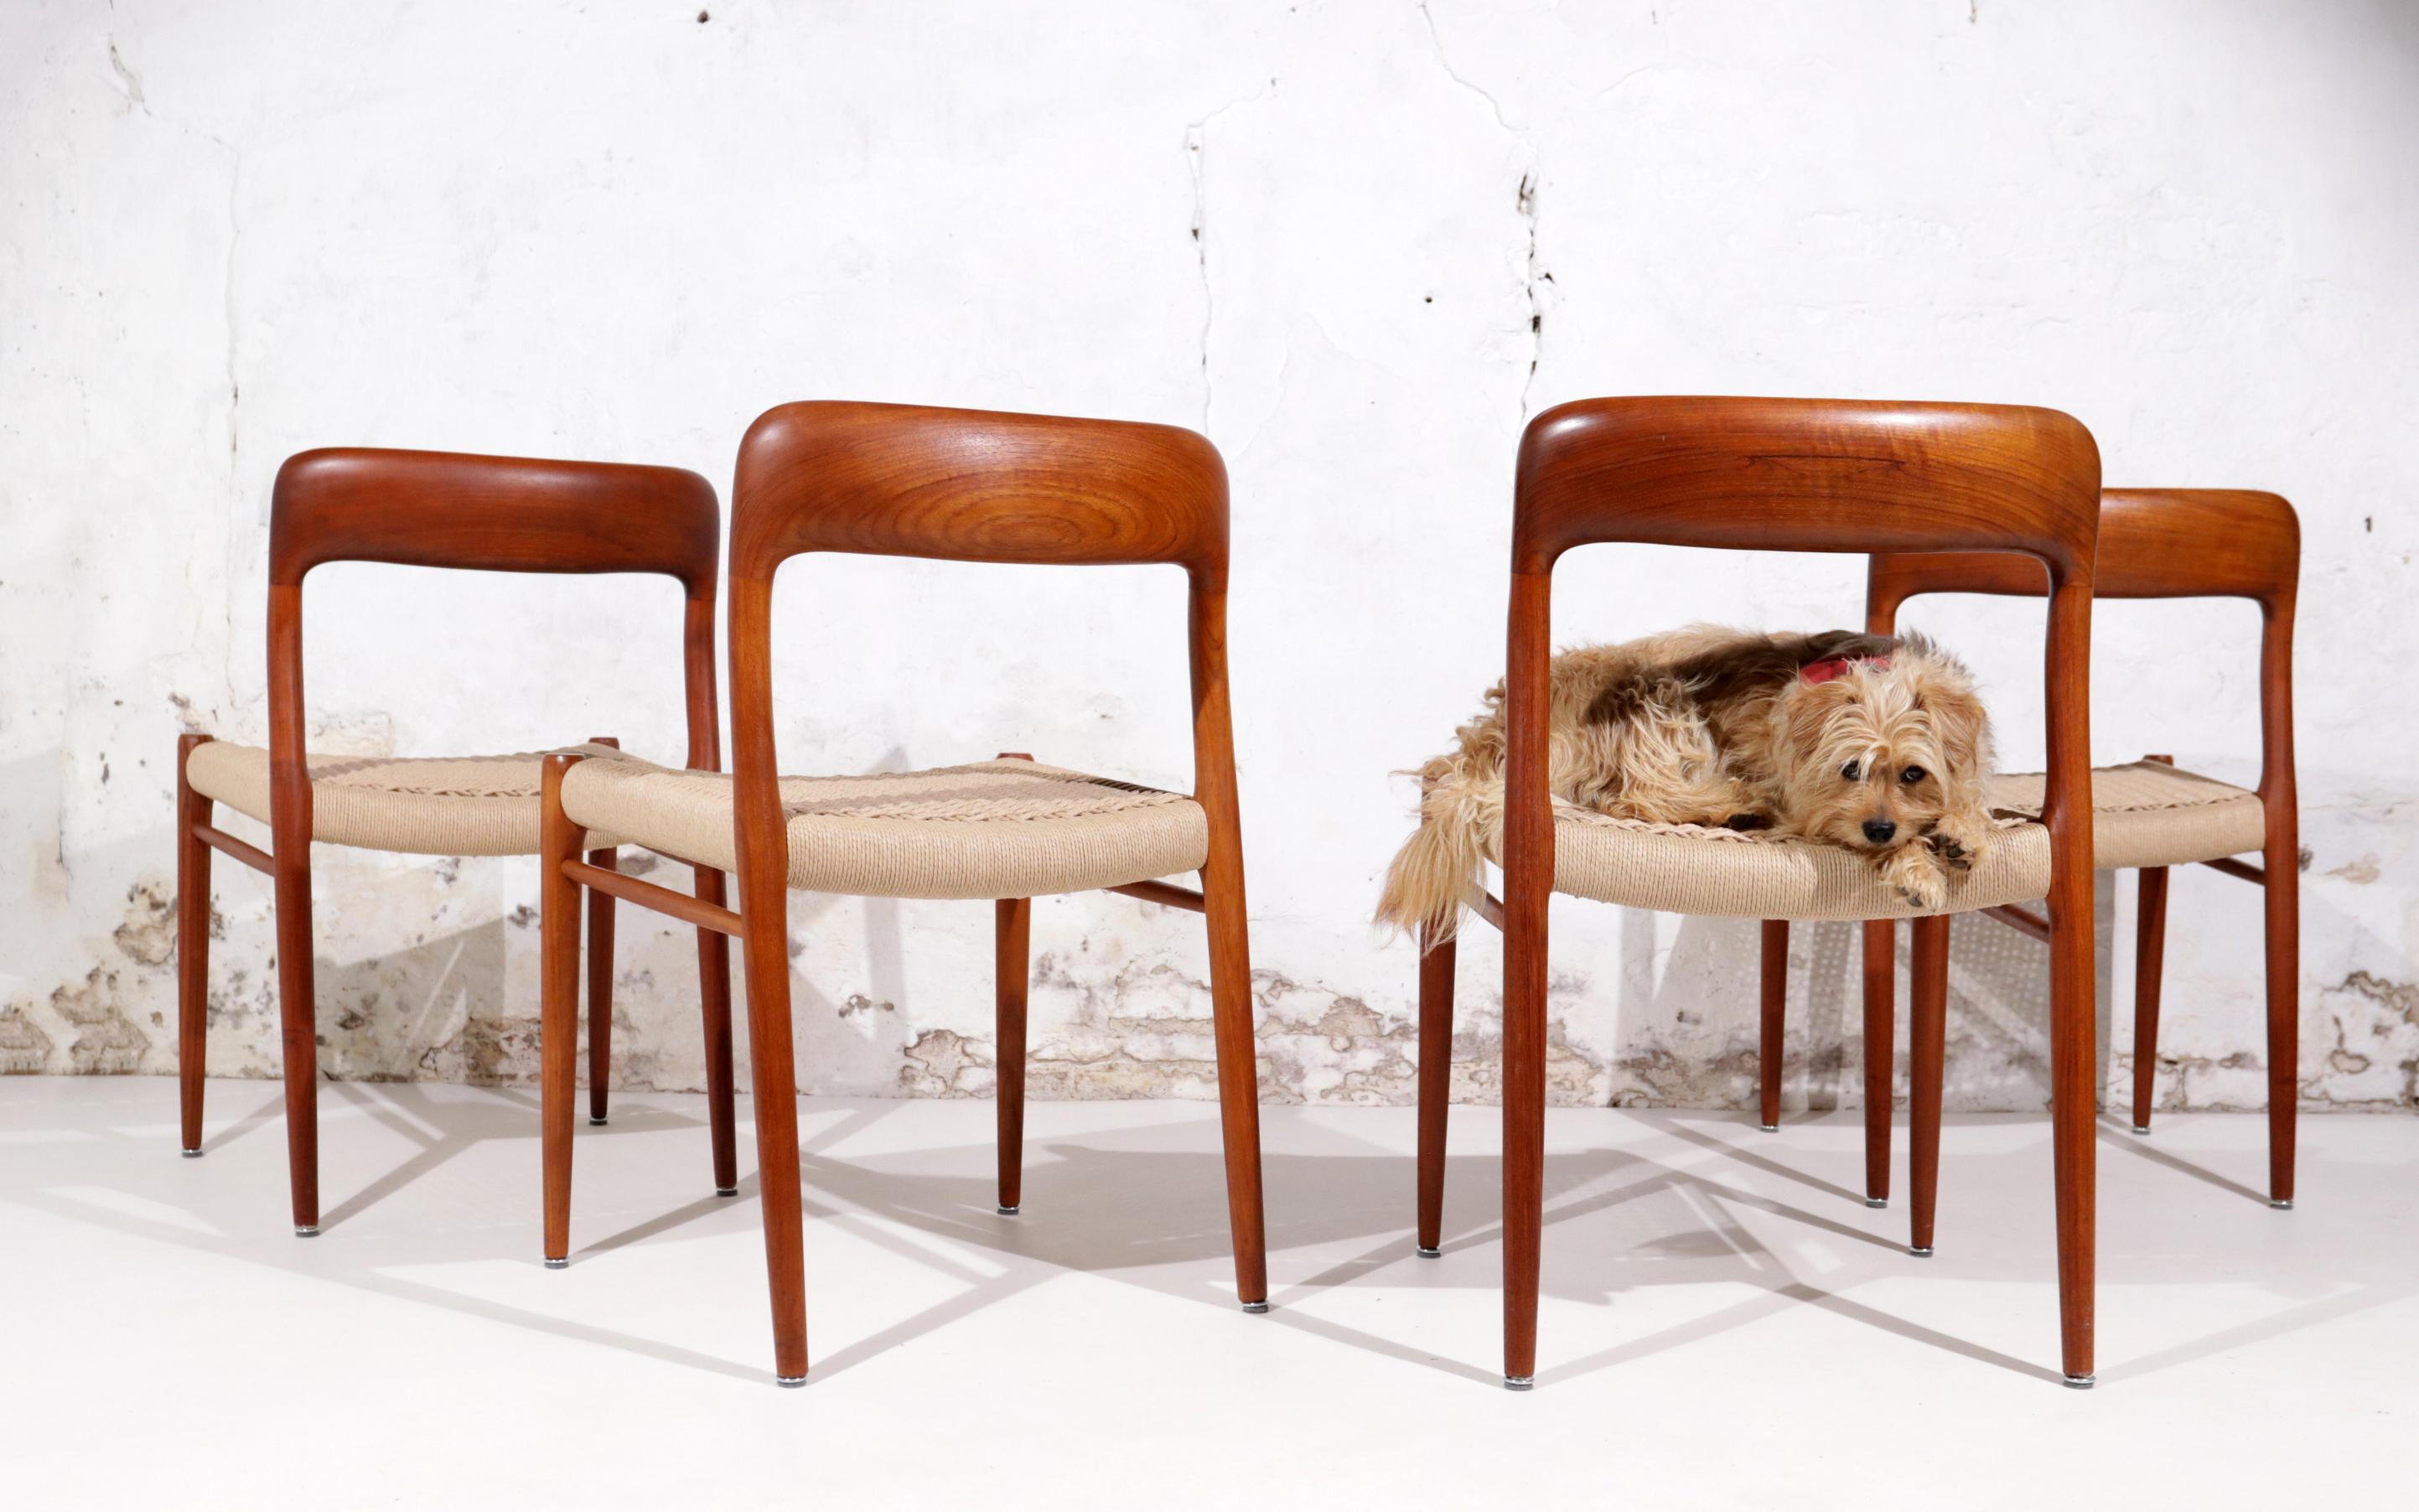 4 beautiful, fully restored, Model 75 chairs designed by the Danish designer Niels Otto Møller, and manufactured by JL Møllers Møbelfabrik in the 1960s
The frames are made of solid teak and the seat has been re-fitted with paper cord.
Timeless